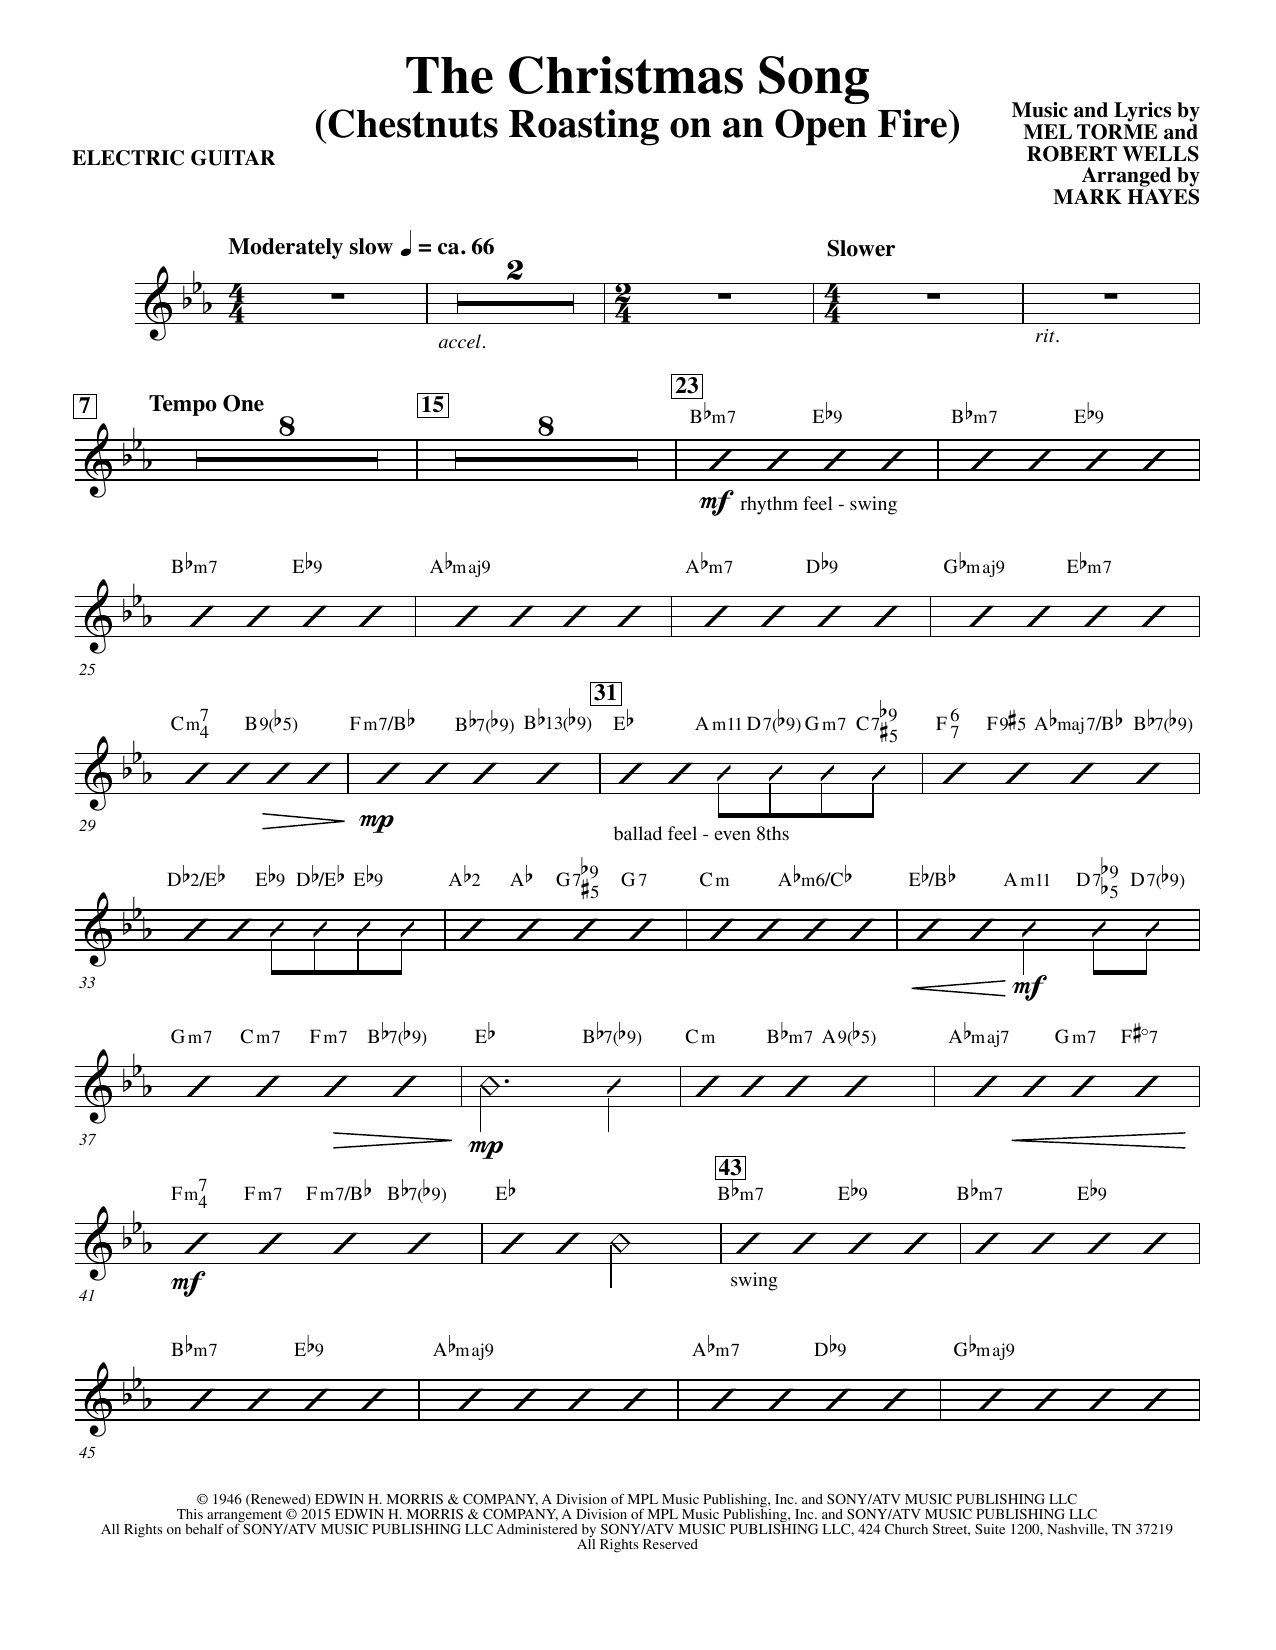 Mel Torme The Christmas Song (Chestnuts Roasting On An Open Fire) - Electric Guitar sheet music notes and chords. Download Printable PDF.